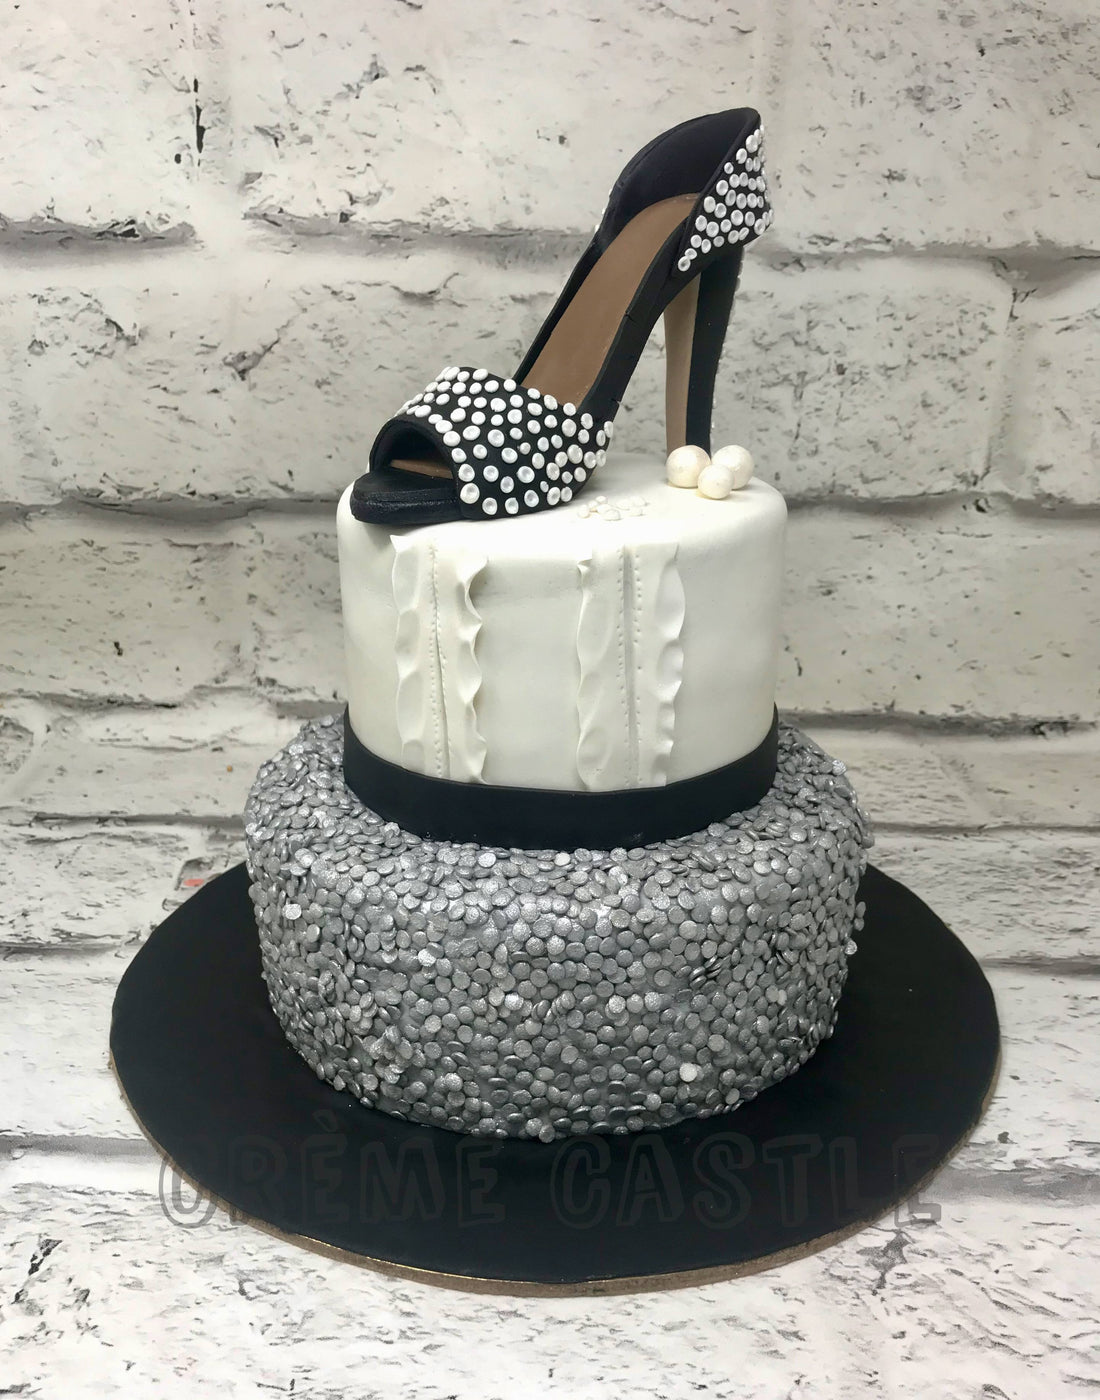 Snazzy Shoes Cake